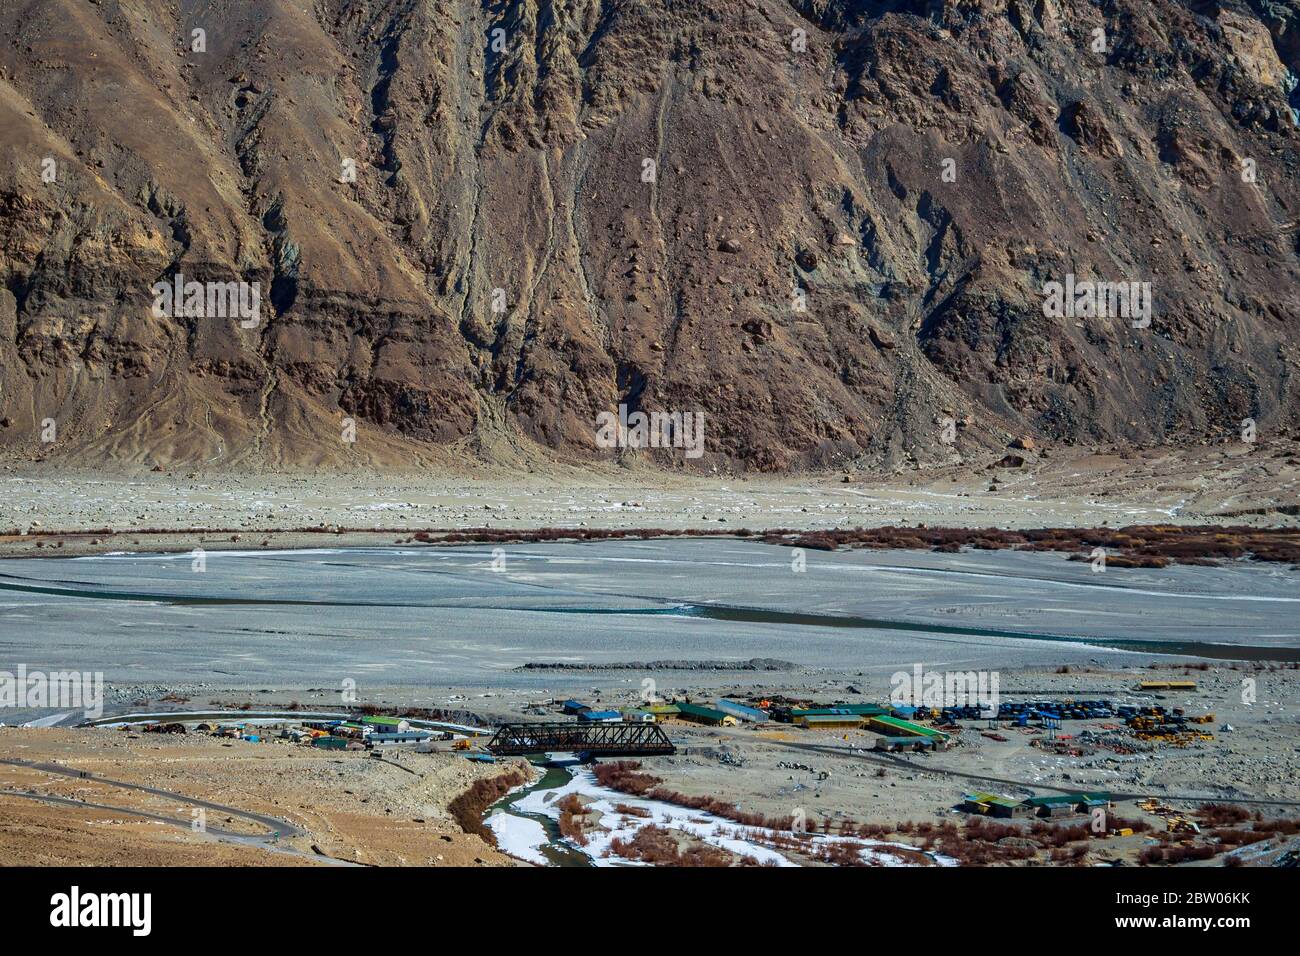 An iron cladded bridge connecting National Highways roads in Ladakh, Jammu and Kashmir, India, Asia. Snow mountains in Ladakh is amazing. Landscape. Stock Photo